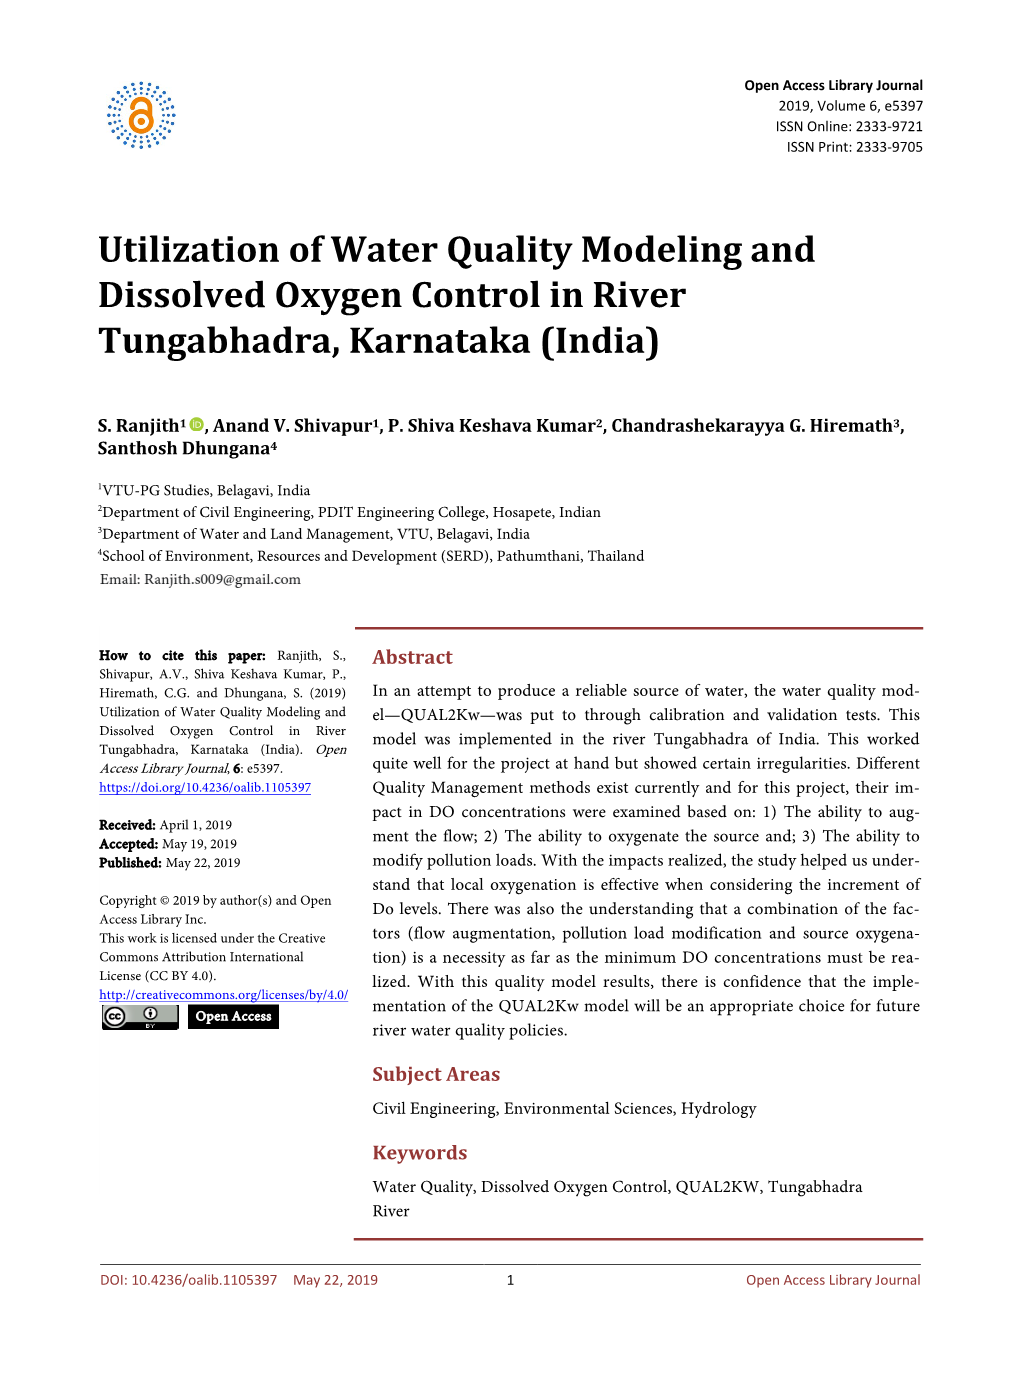 Utilization of Water Quality Modeling and Dissolved Oxygen Control in River Tungabhadra, Karnataka (India)